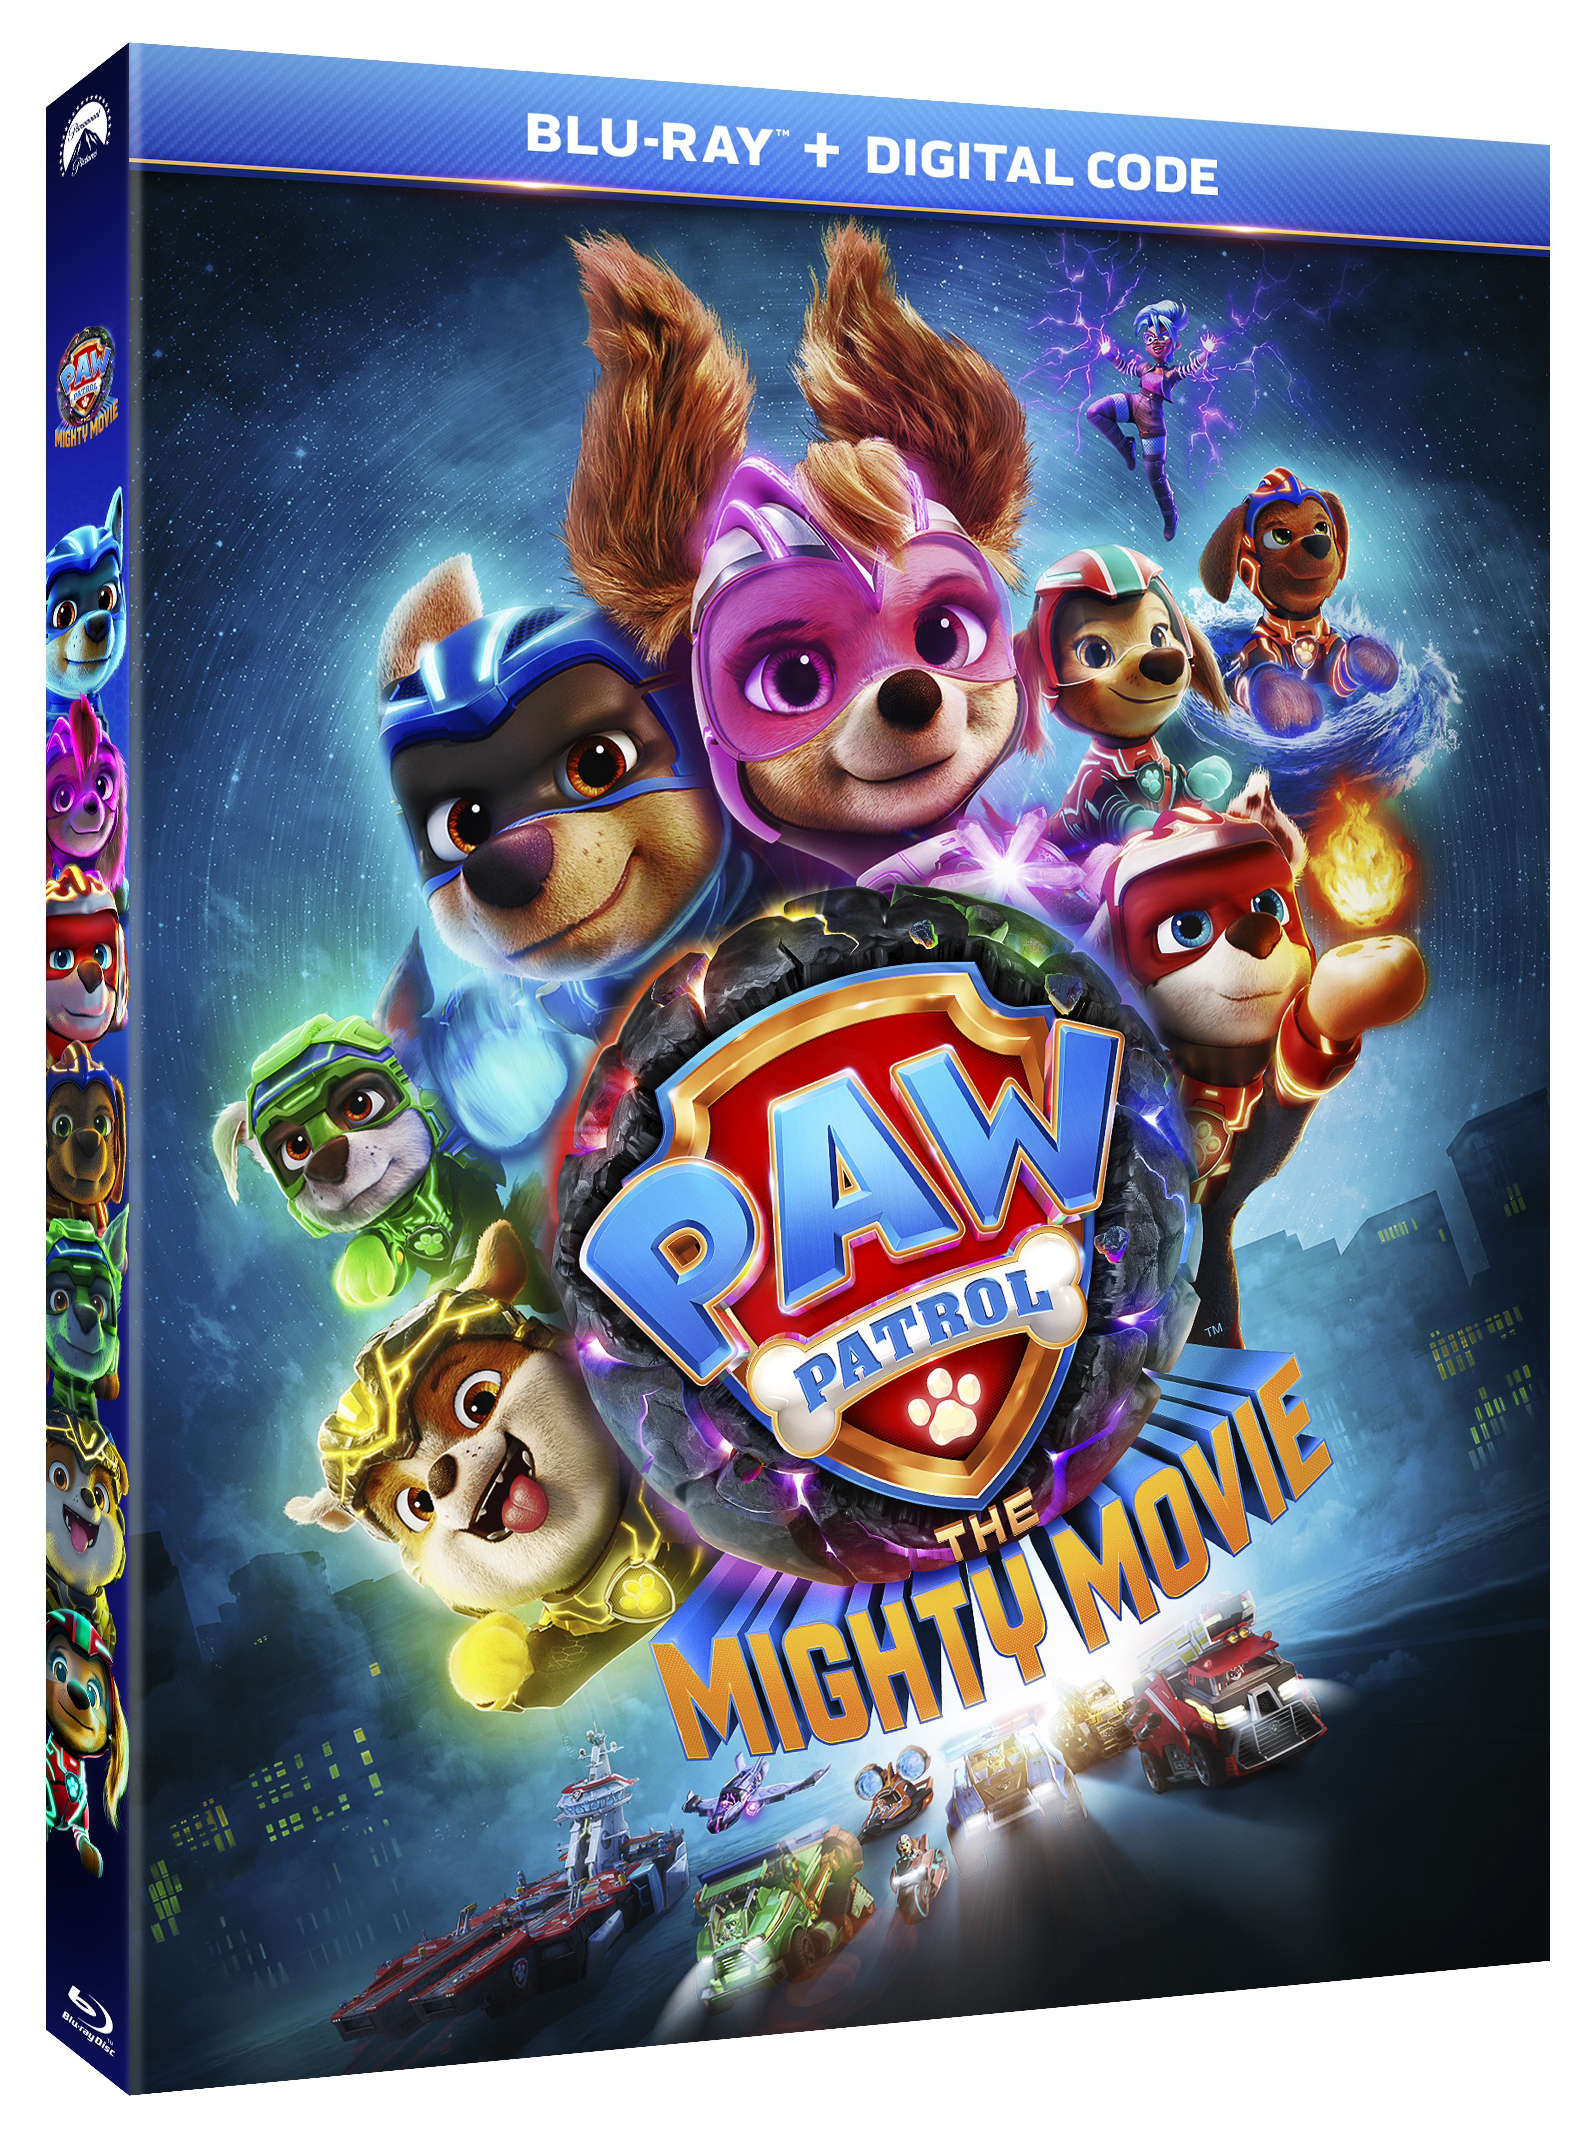 PAW Patrol: The Mighty Movie comes to Digital on October 31st and Blu-ray &  DVD on December 12th